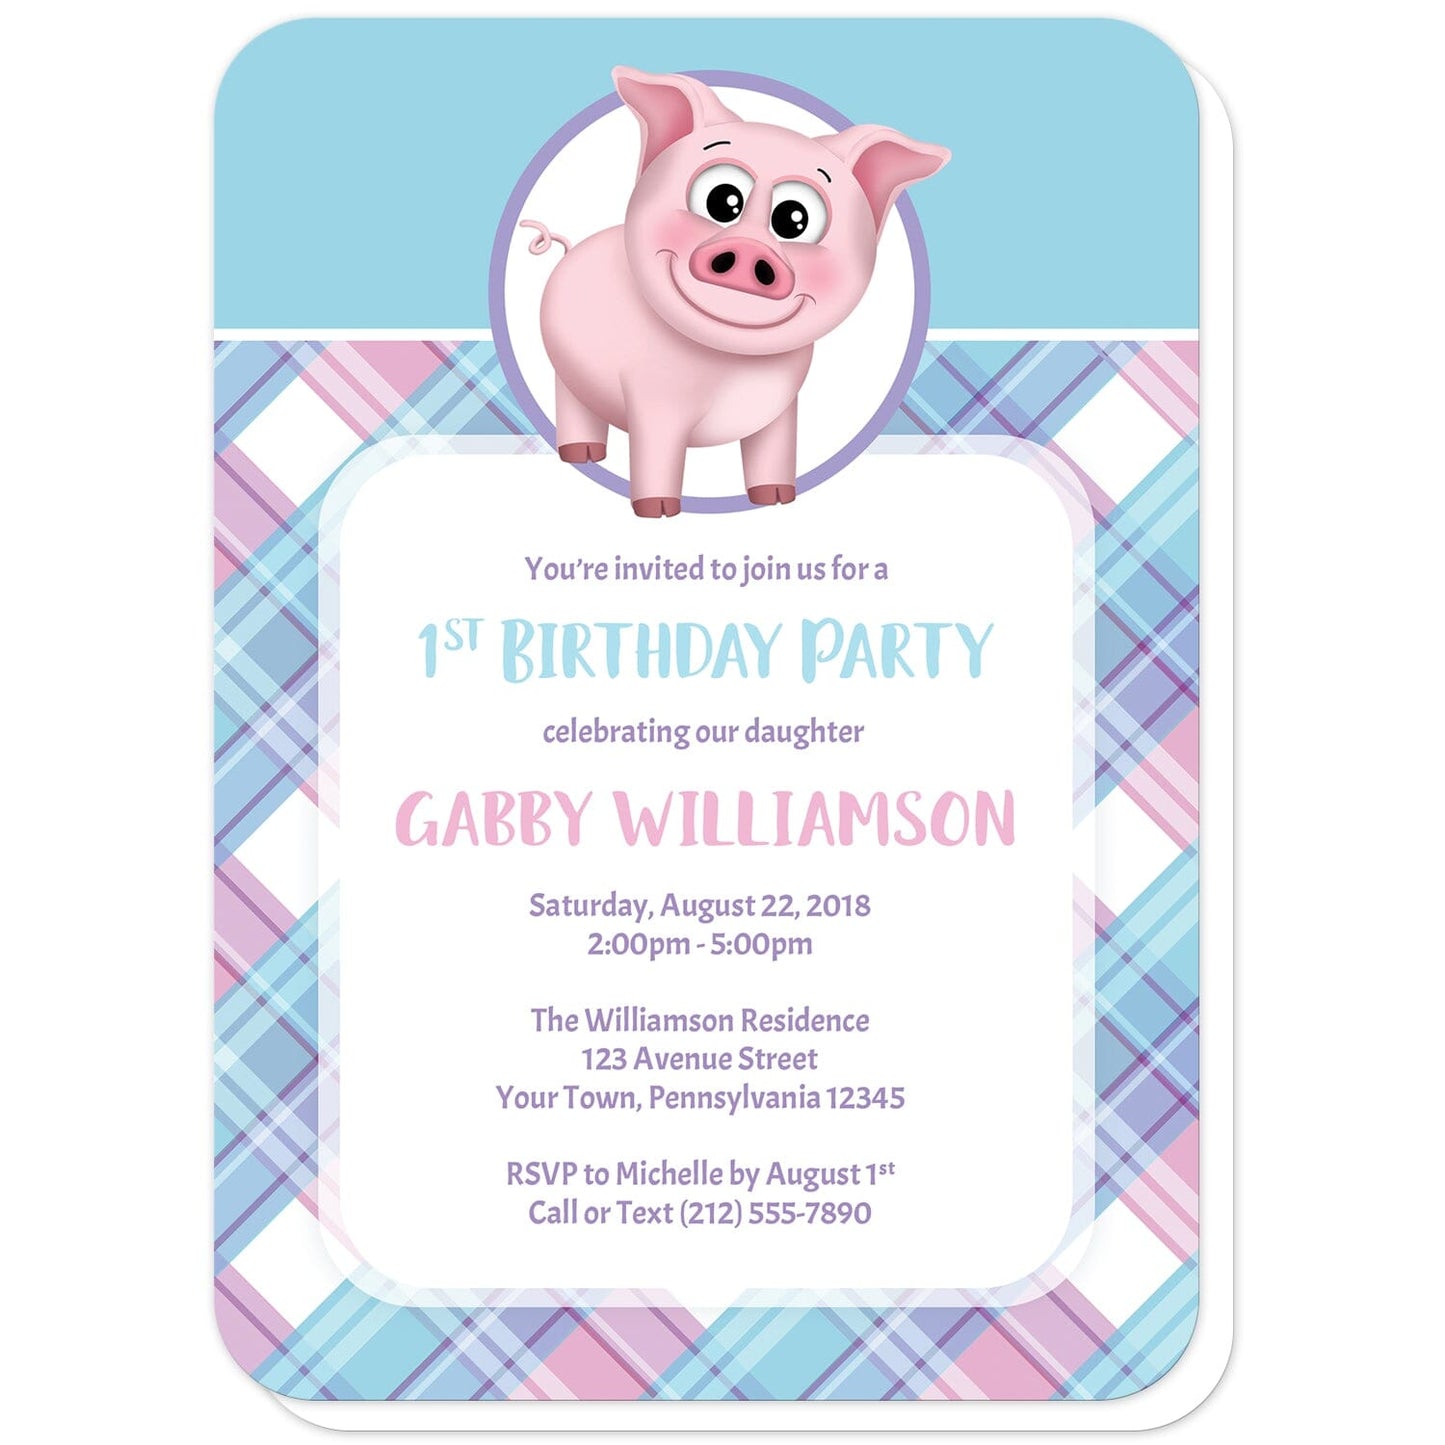 Happy Pig Pink Blue and Purple Plaid Birthday Party Invitations (with rounded corners) at Artistically Invited. Happy pig pink blue and purple plaid birthday party invitations that are illustrated with a cute and happy pink pig in a white and purple circle over a blue background along the top, and a pink, blue, and purple plaid pattern background on the bottom. Your personalized birthday party details are custom printed in pink, blue and purple over a white rectangular area over the plaid pattern.